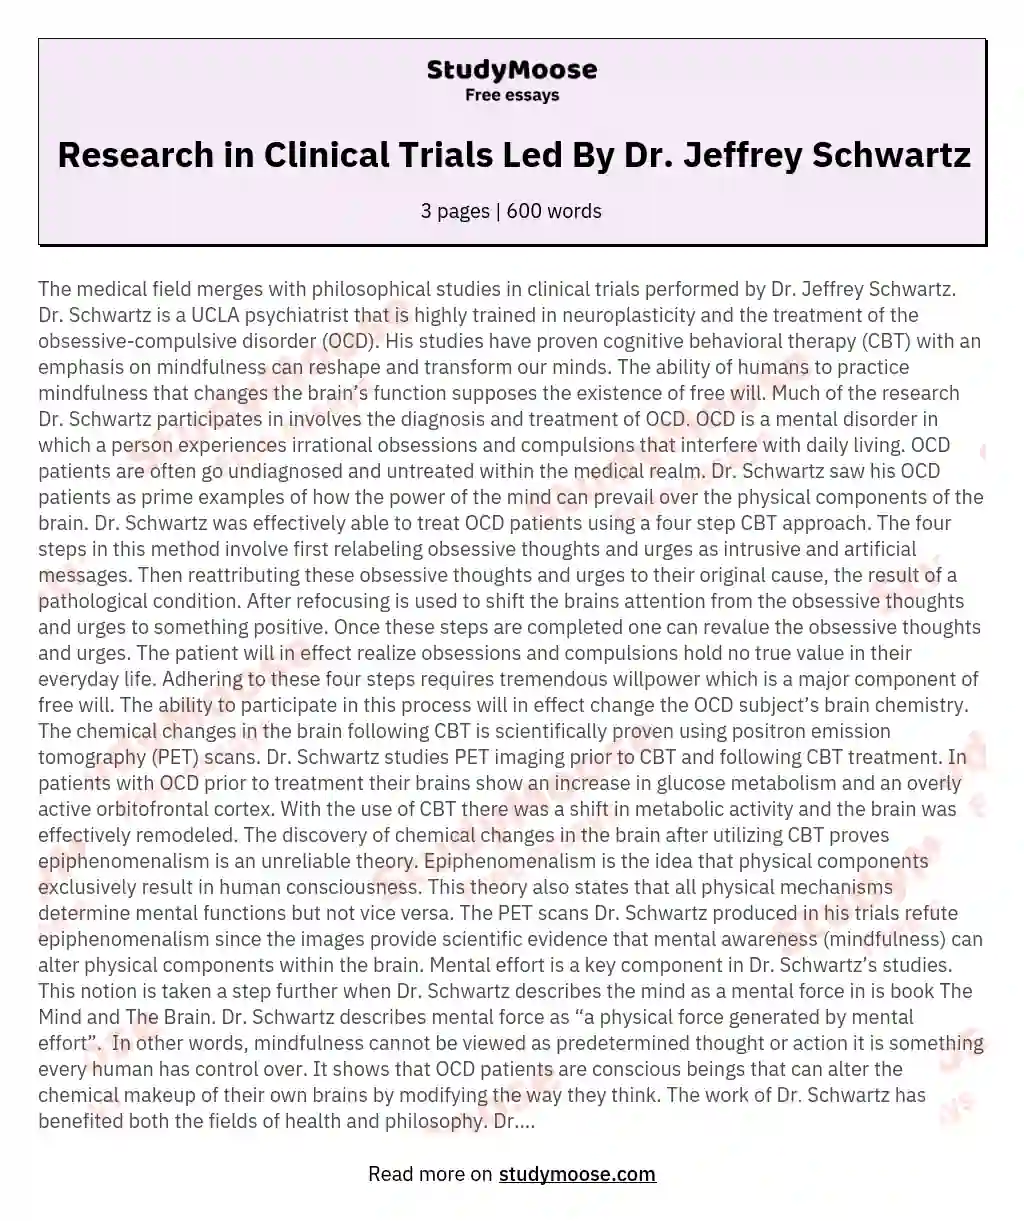 Research in Clinical Trials Led By Dr. Jeffrey Schwartz essay